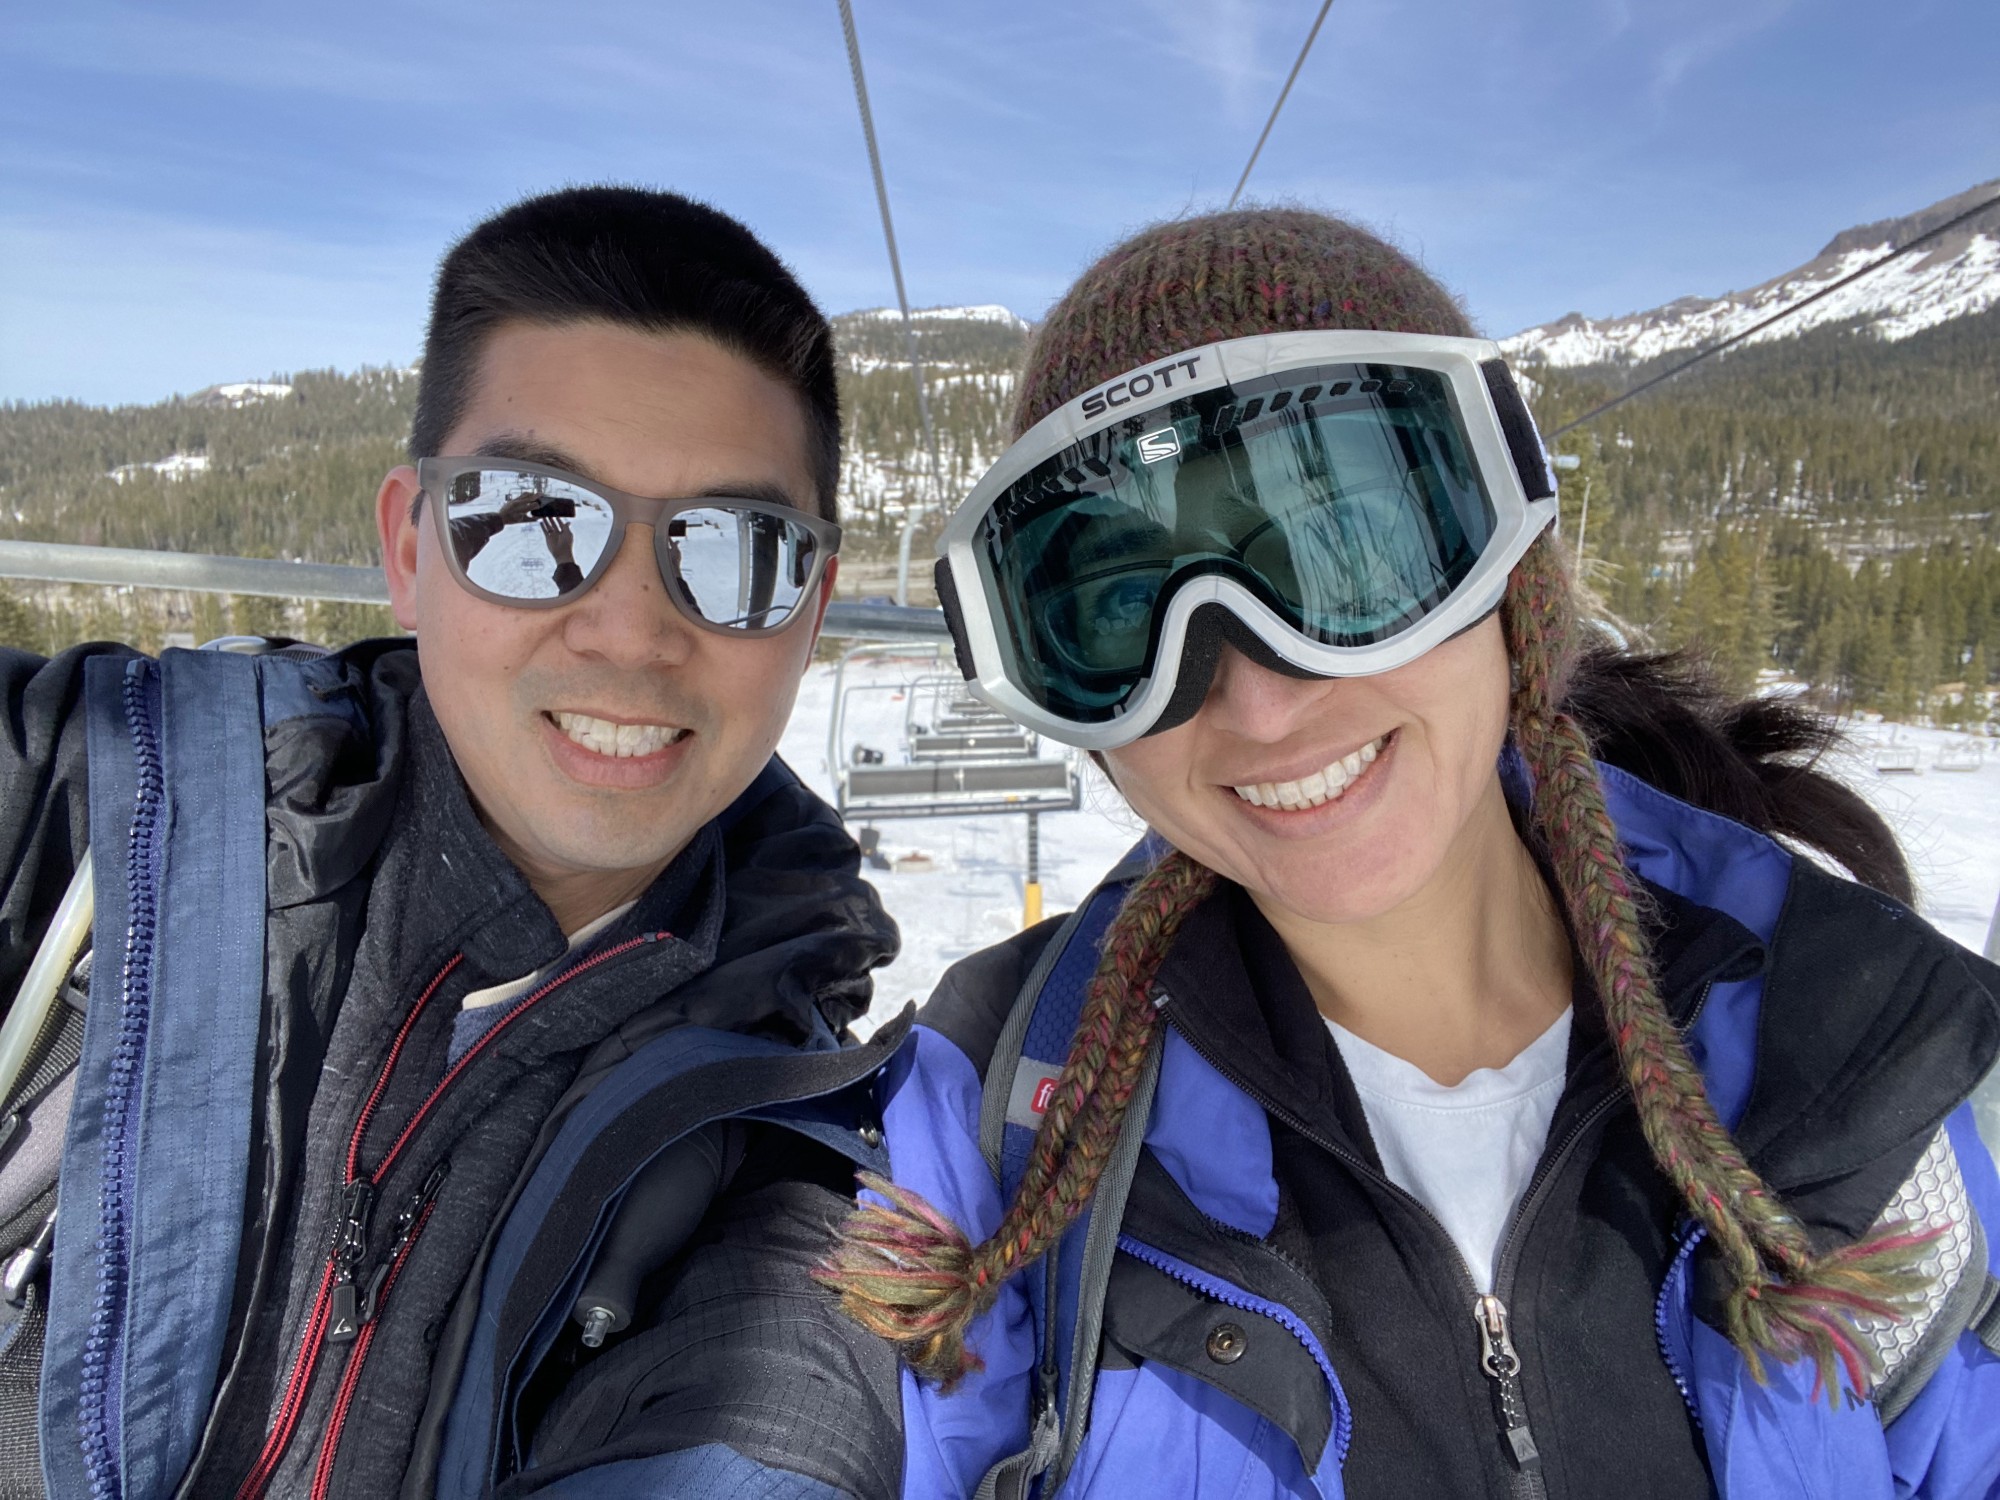 Mommy and Daddy look so good on the ski lift!